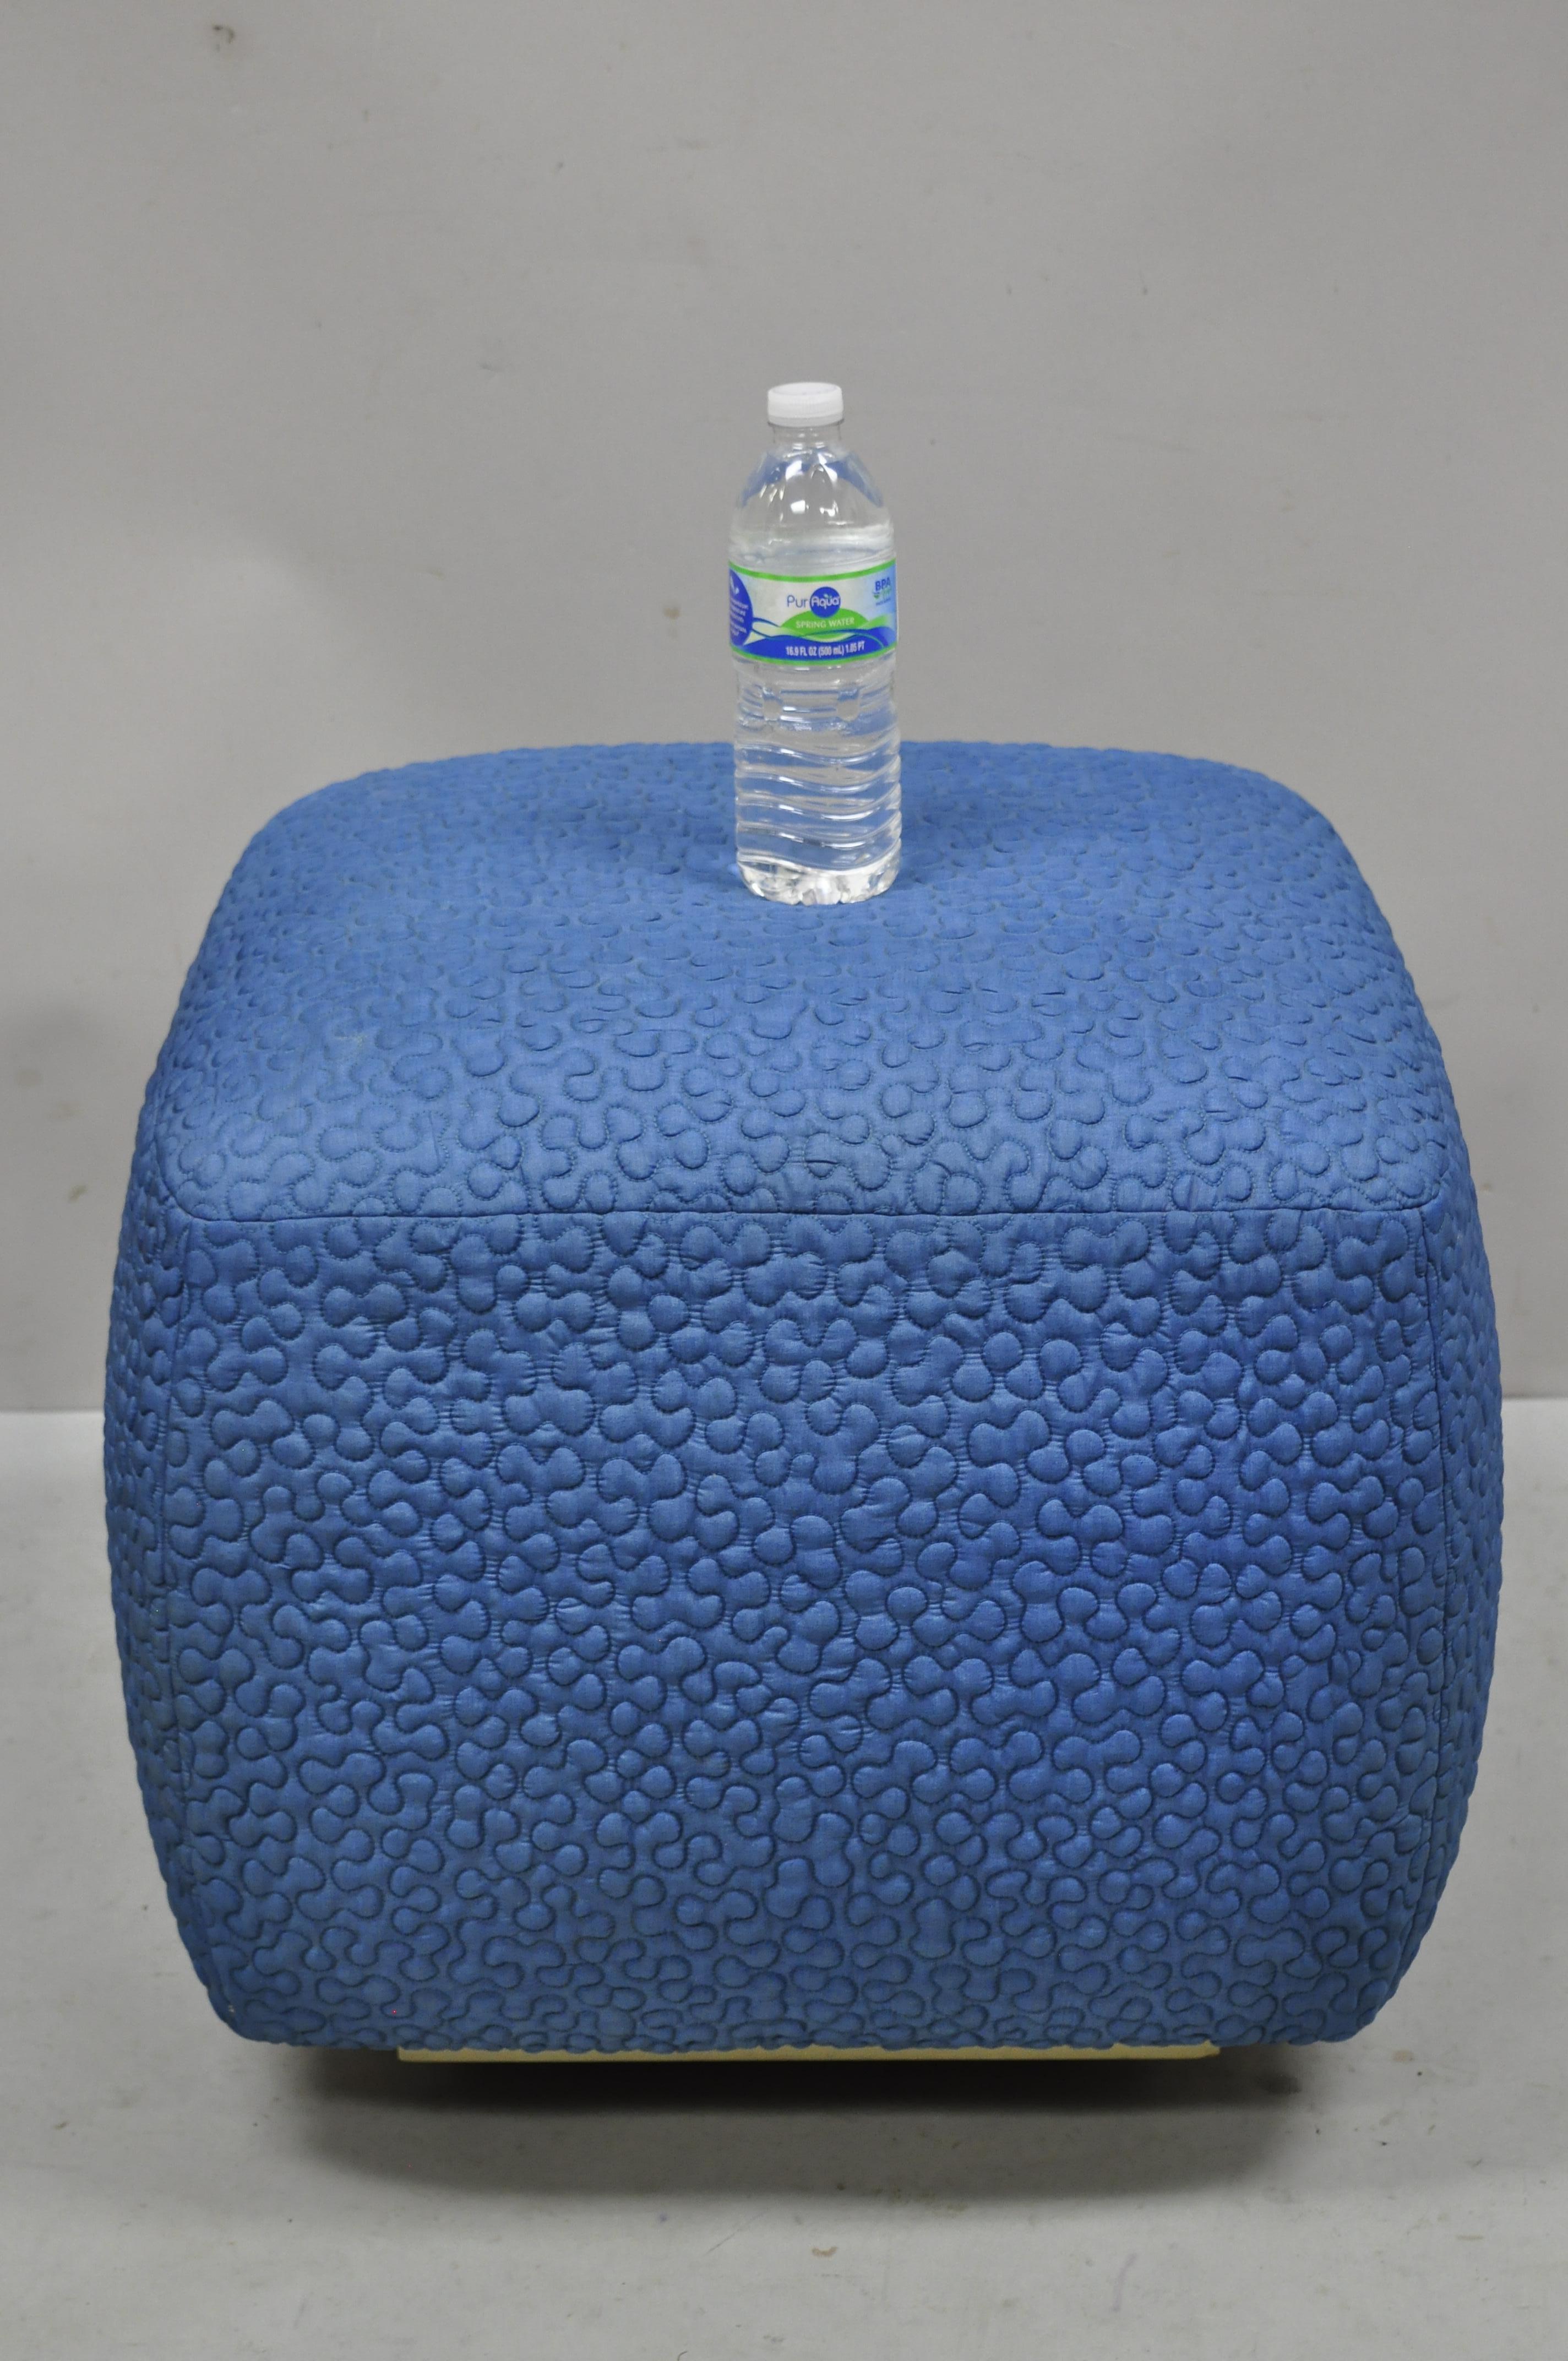 Mid-20th Century Vintage 1960s Square Pouf Ottoman Blue Stitched Fabric Rolling Casters Wheels For Sale